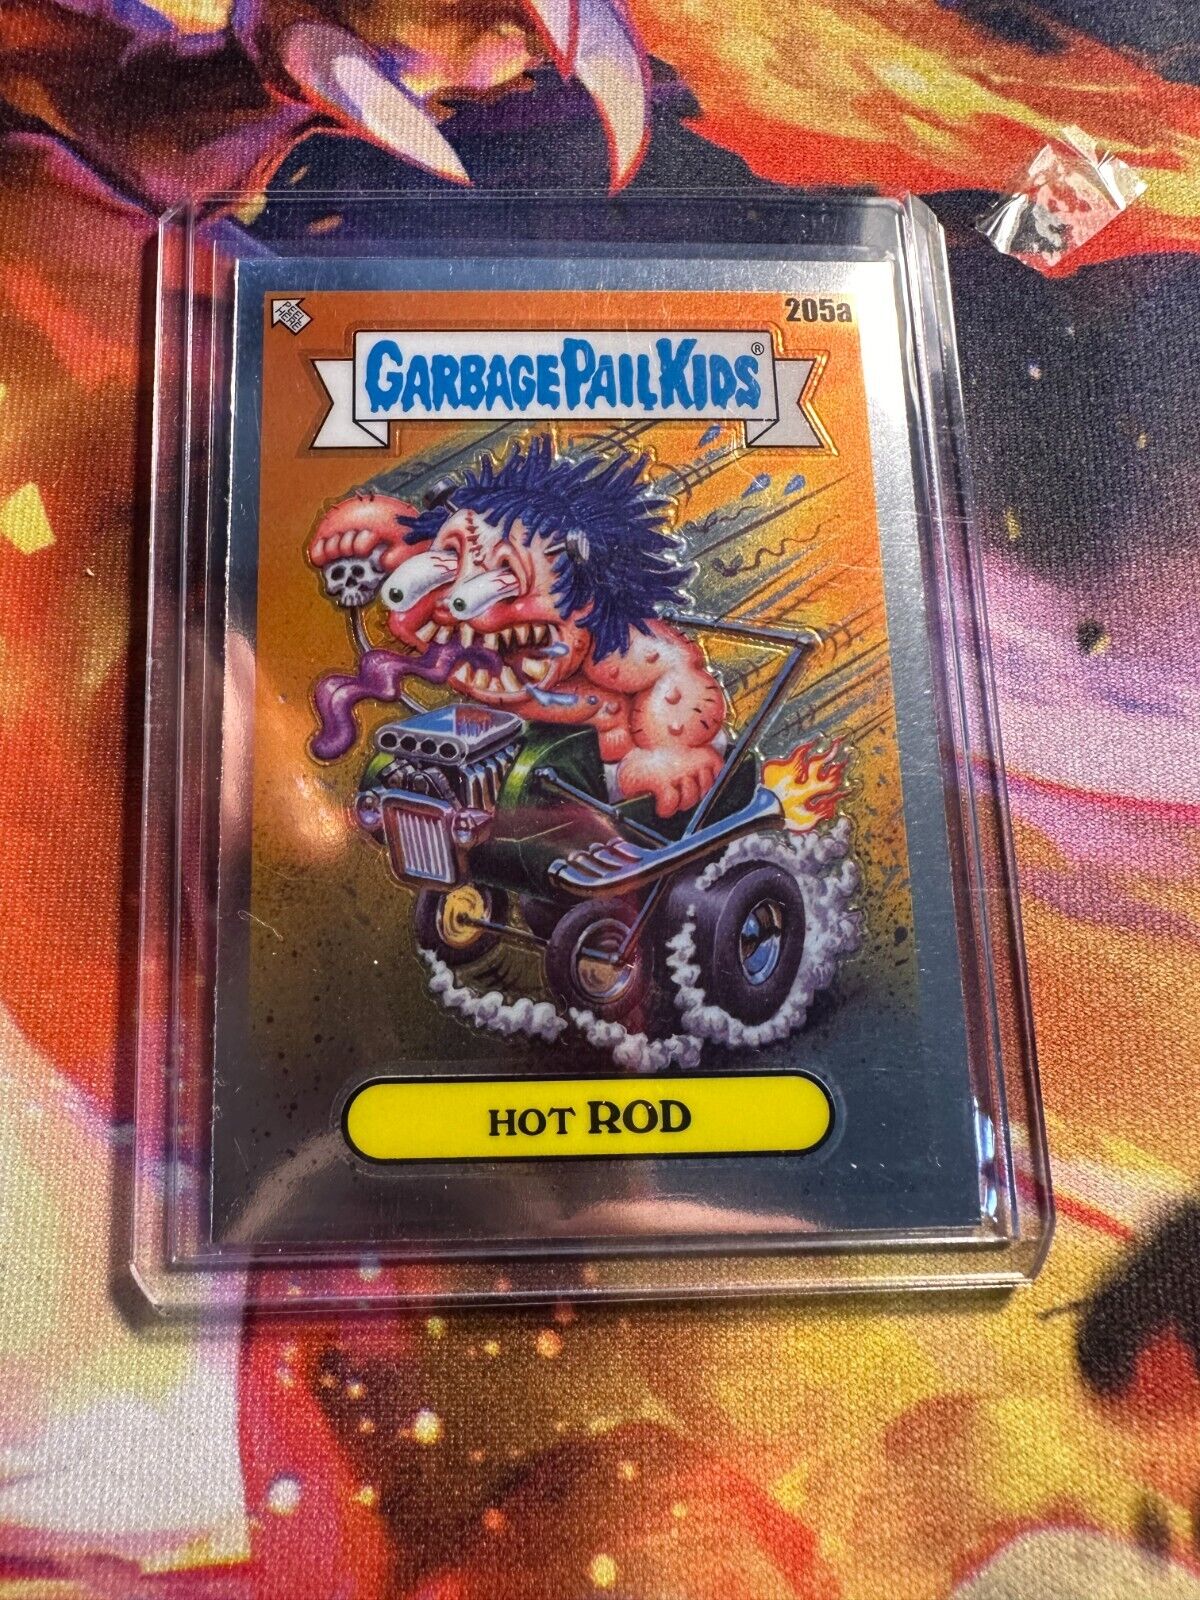 2022 Topps Chrome Garbage Pail Kids Refractor NO. 205a Hot Rod